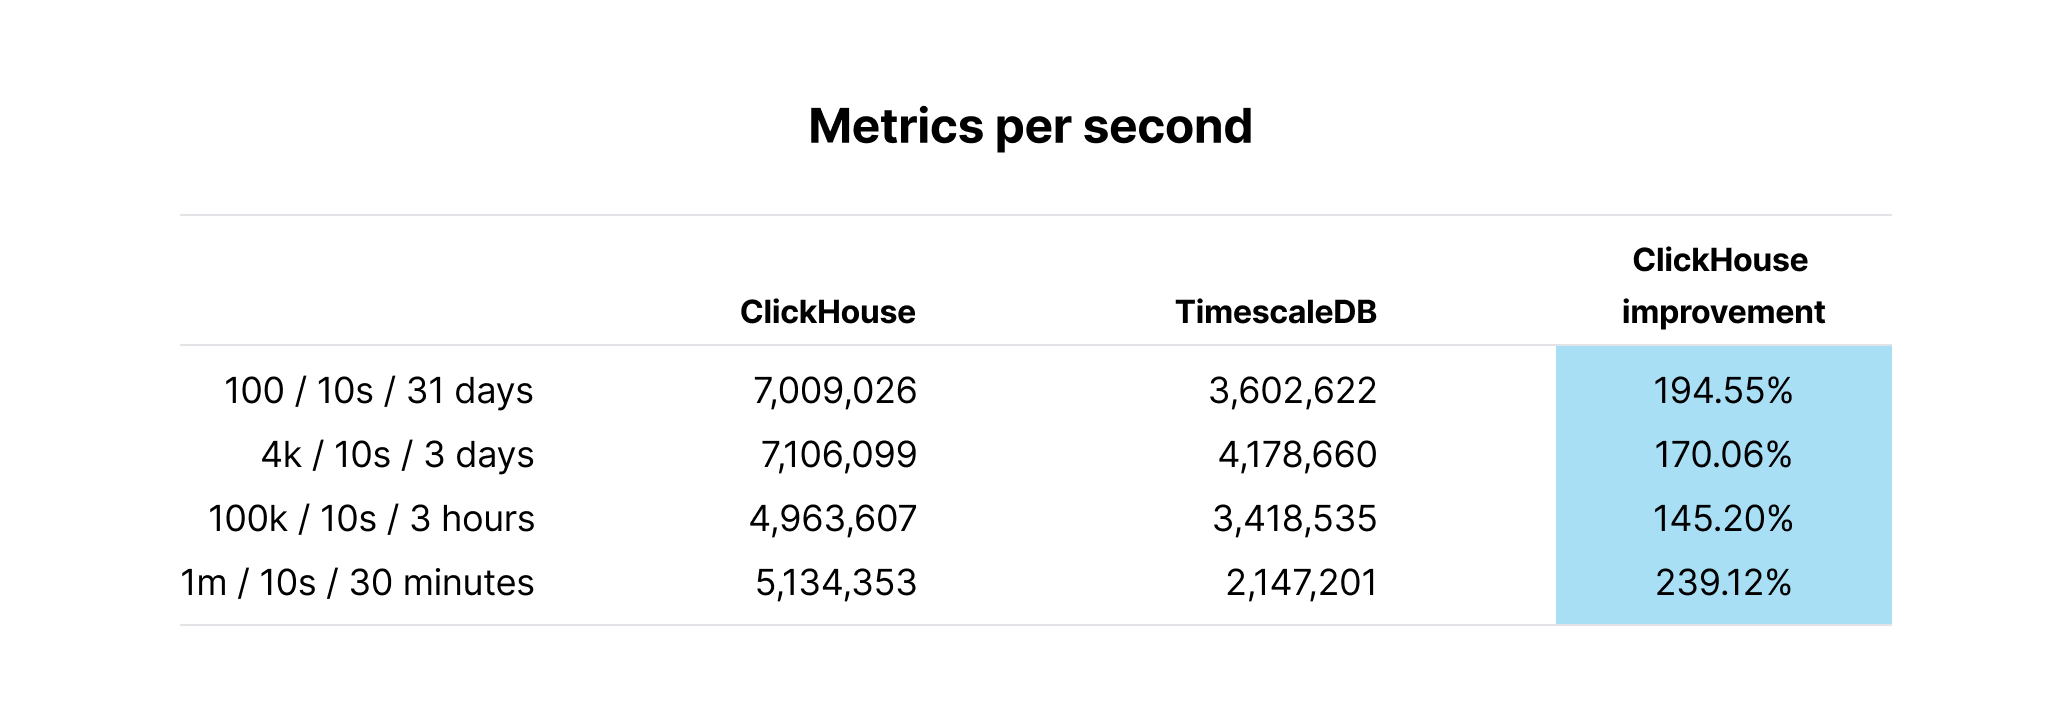 Table showing the final insert results between ClickHouse and TimescaleDB when using larger 5,000 rows/batch